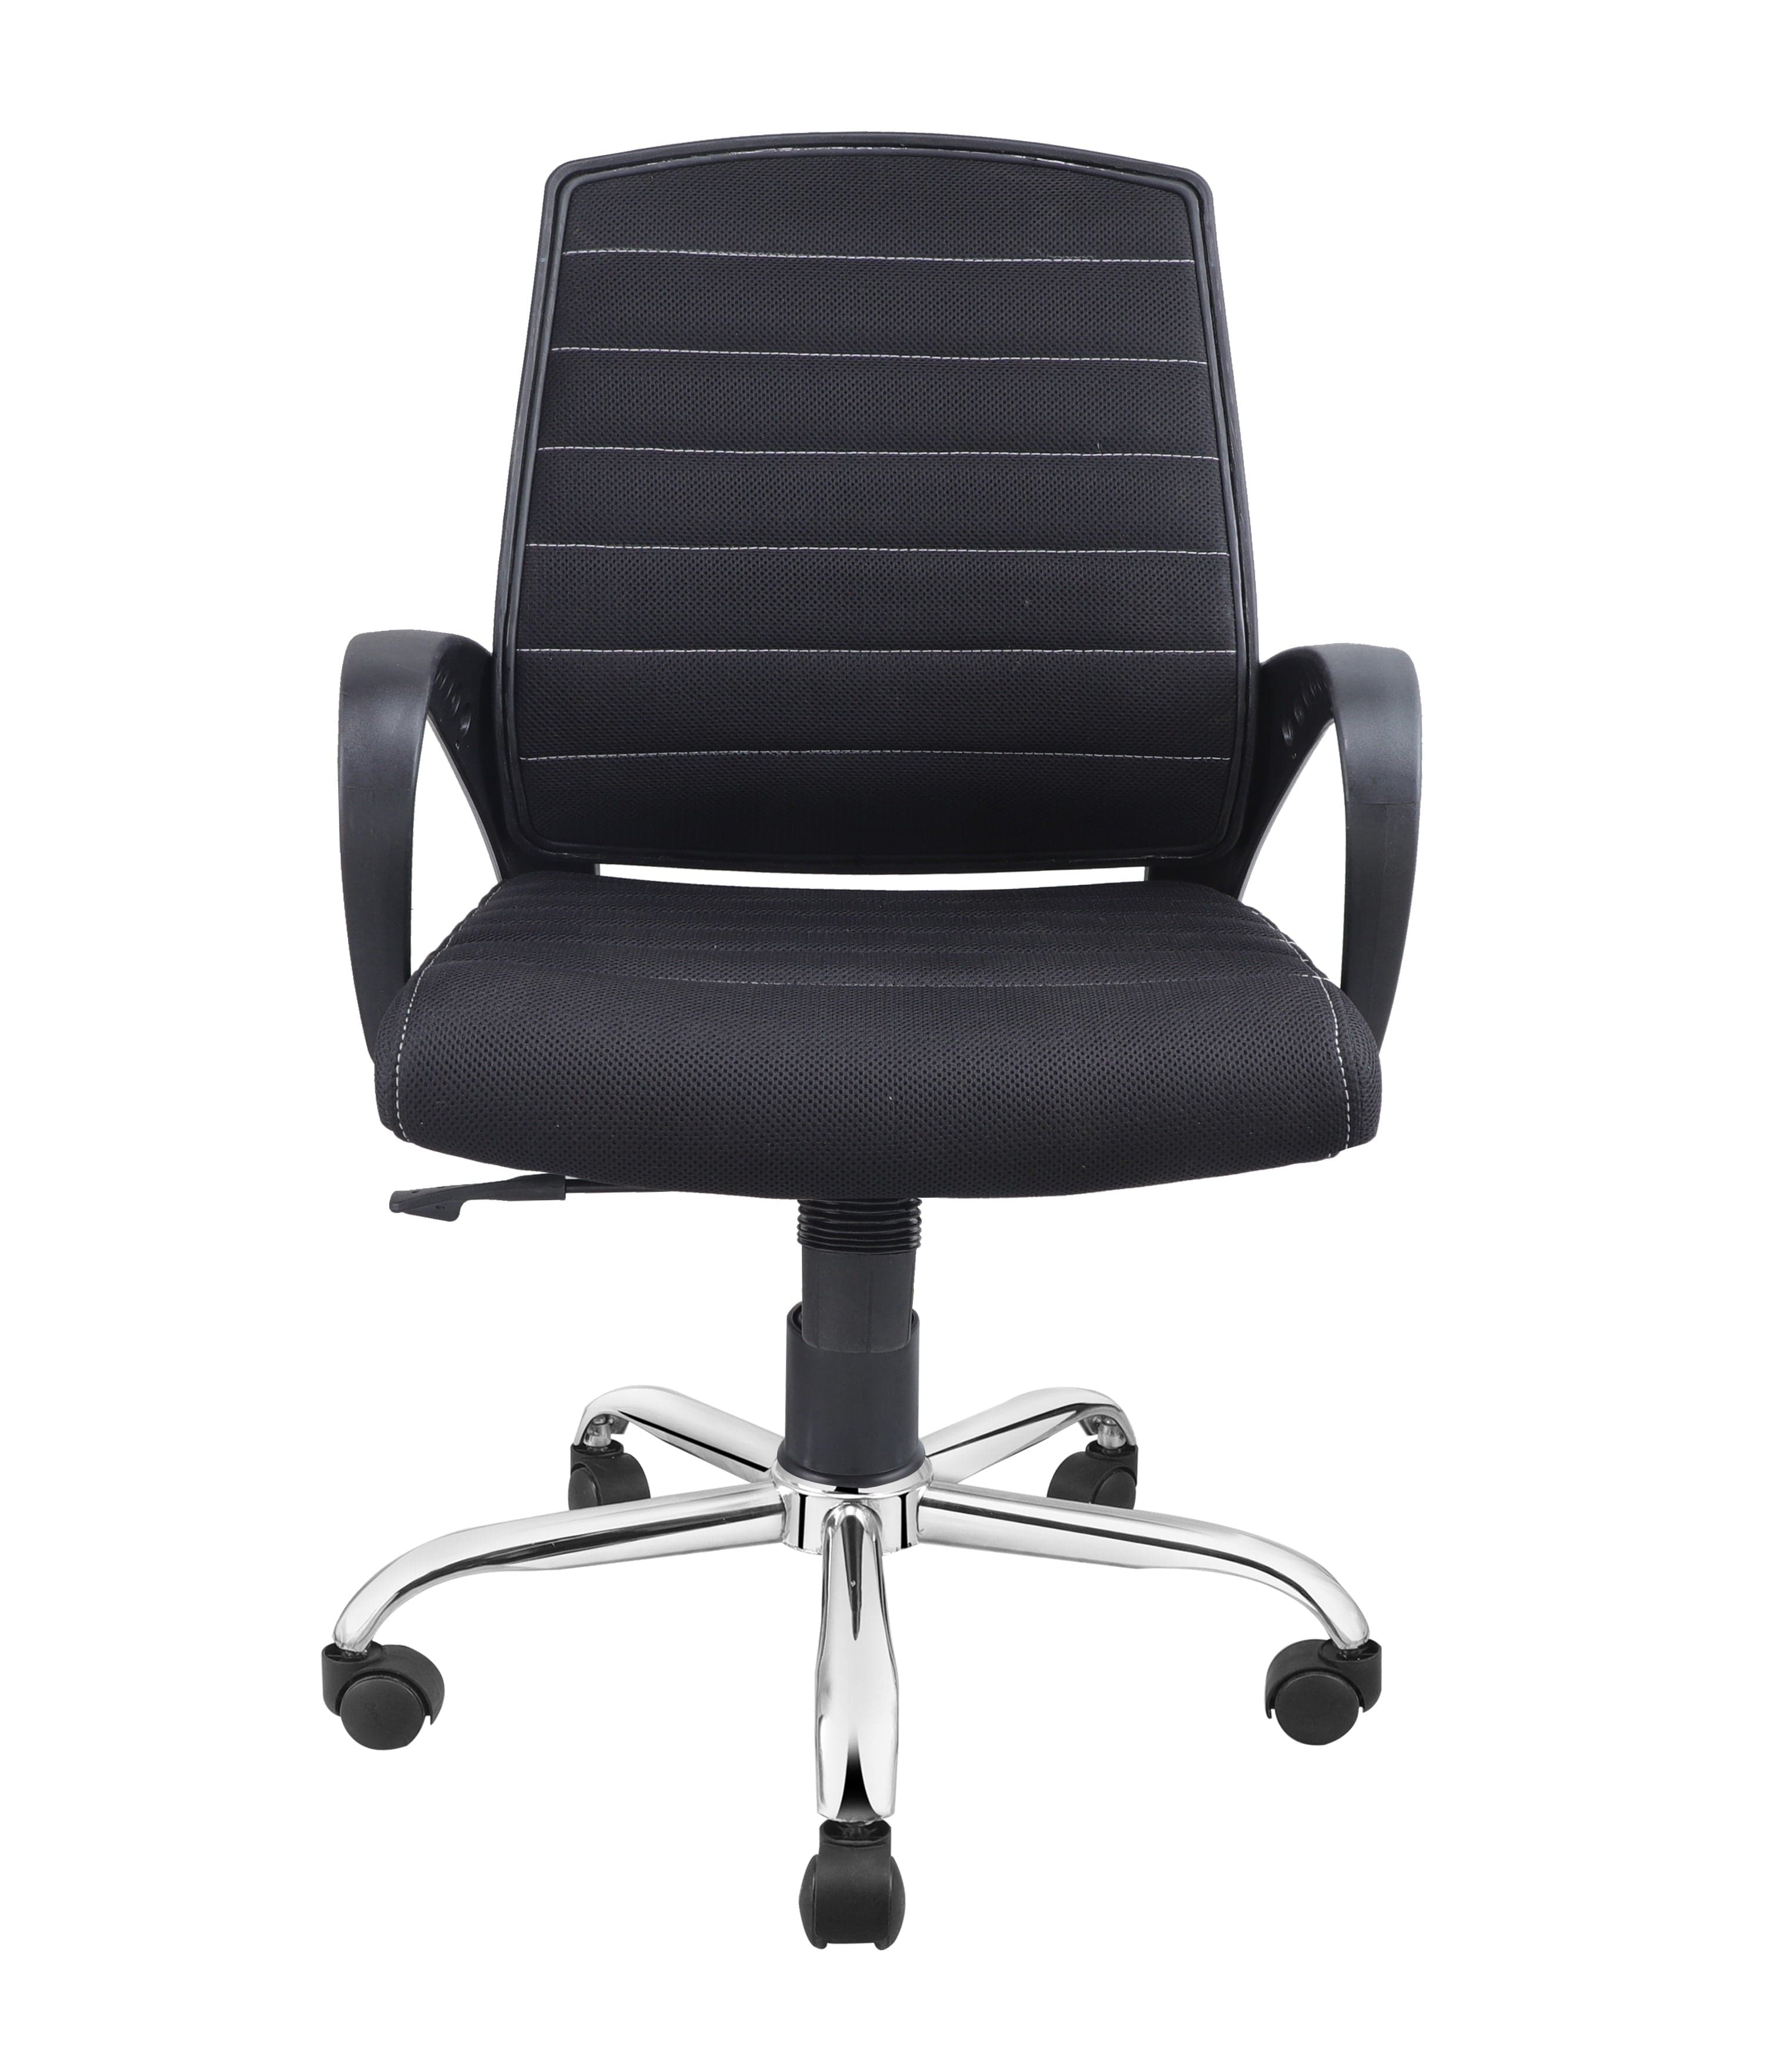 Smart Ergonomic Chair With Breathable Black Mesh Fabric